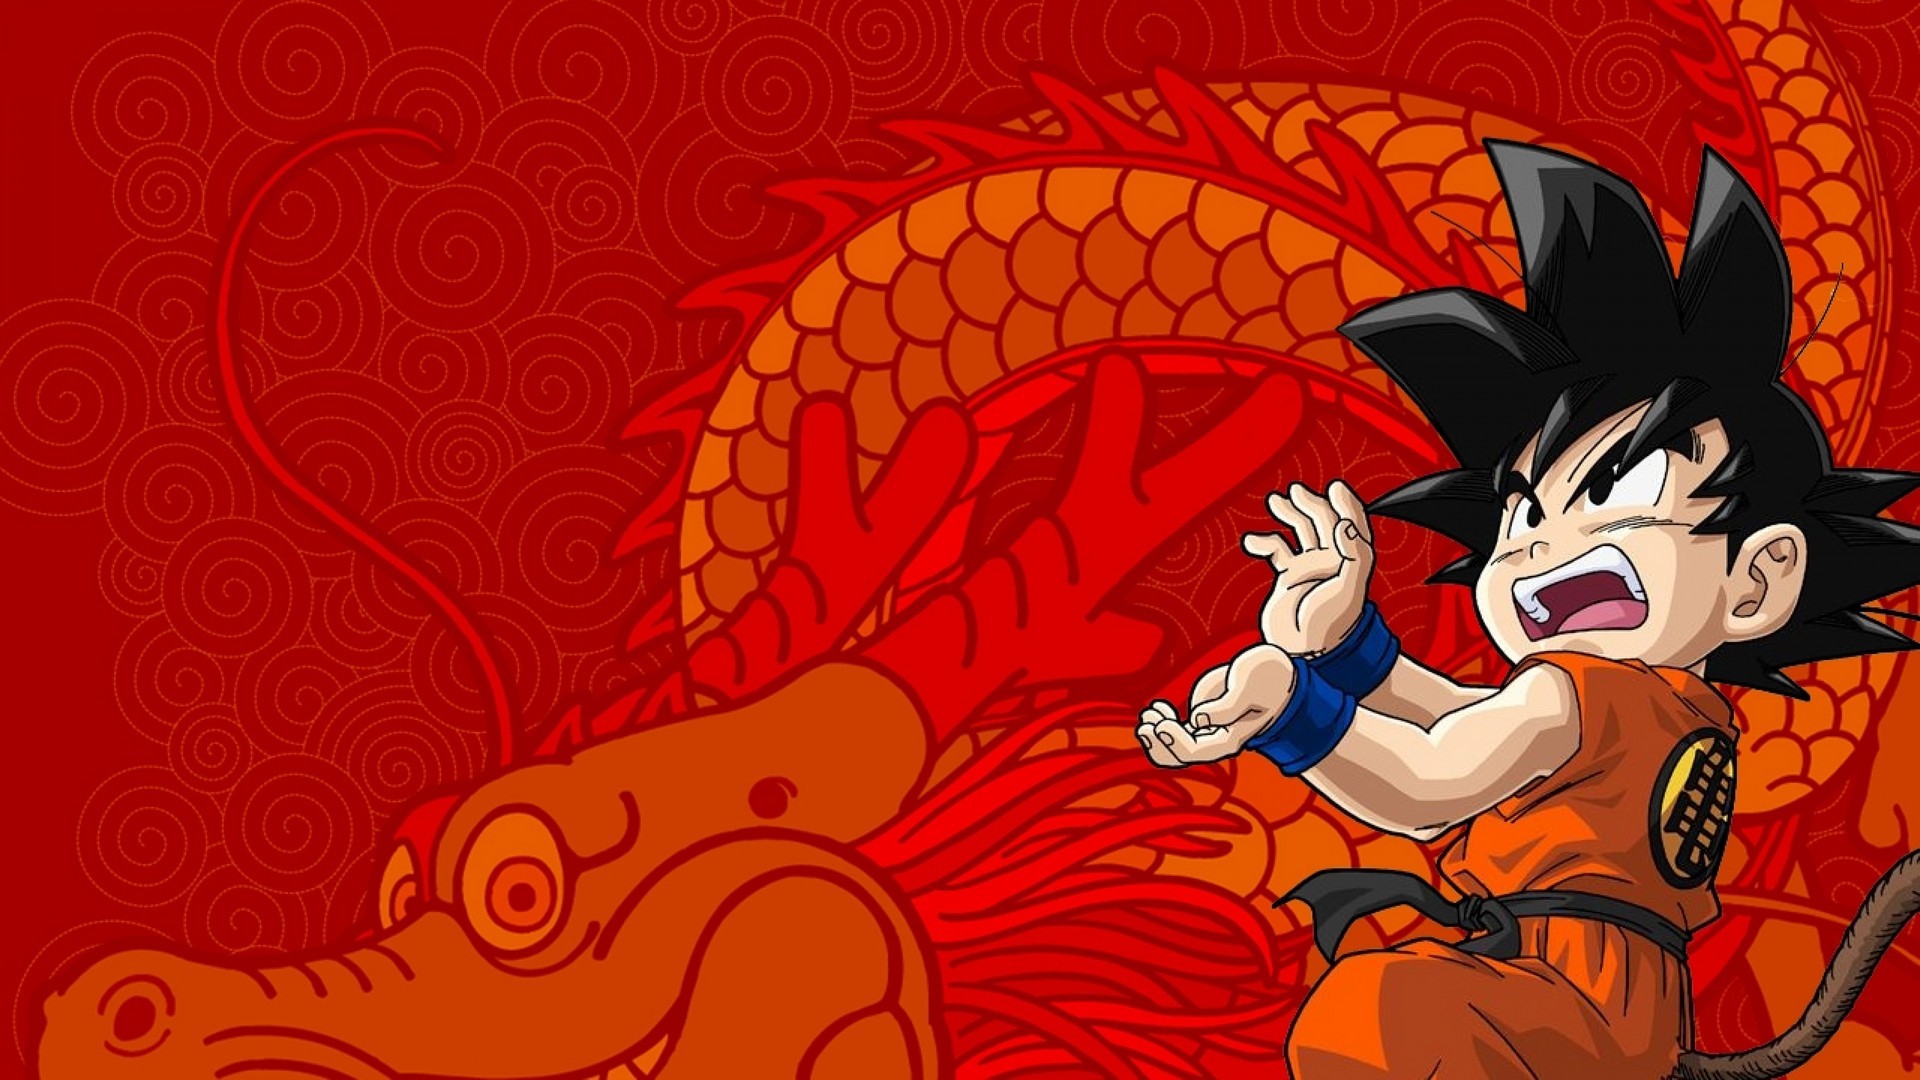 Wallpapers Kid Goku with image resolution 1920x1080 pixel. You can use this wallpaper as background for your desktop Computer Screensavers, Android or iPhone smartphones